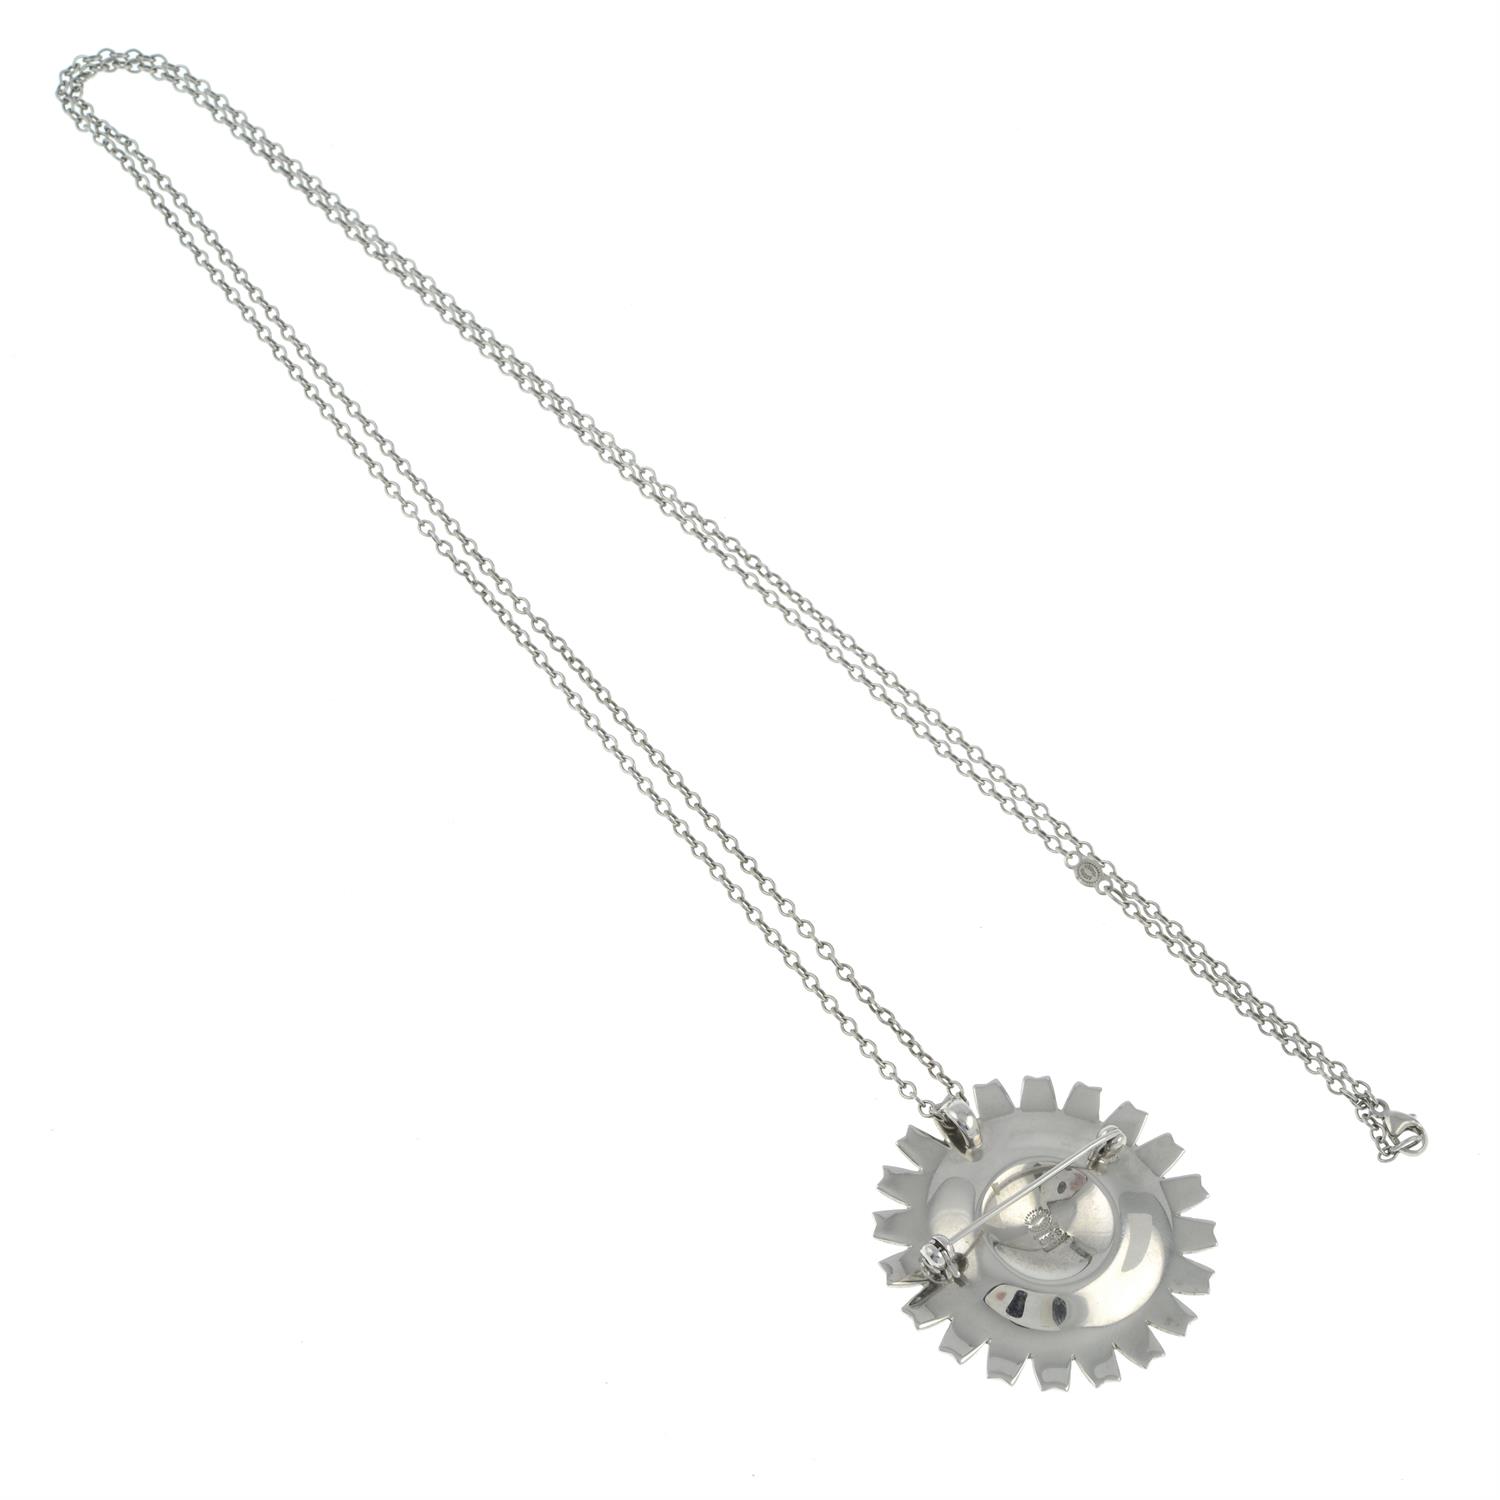 Silver purple daisy pendant, with chain, by Georg Jensen - Image 2 of 3